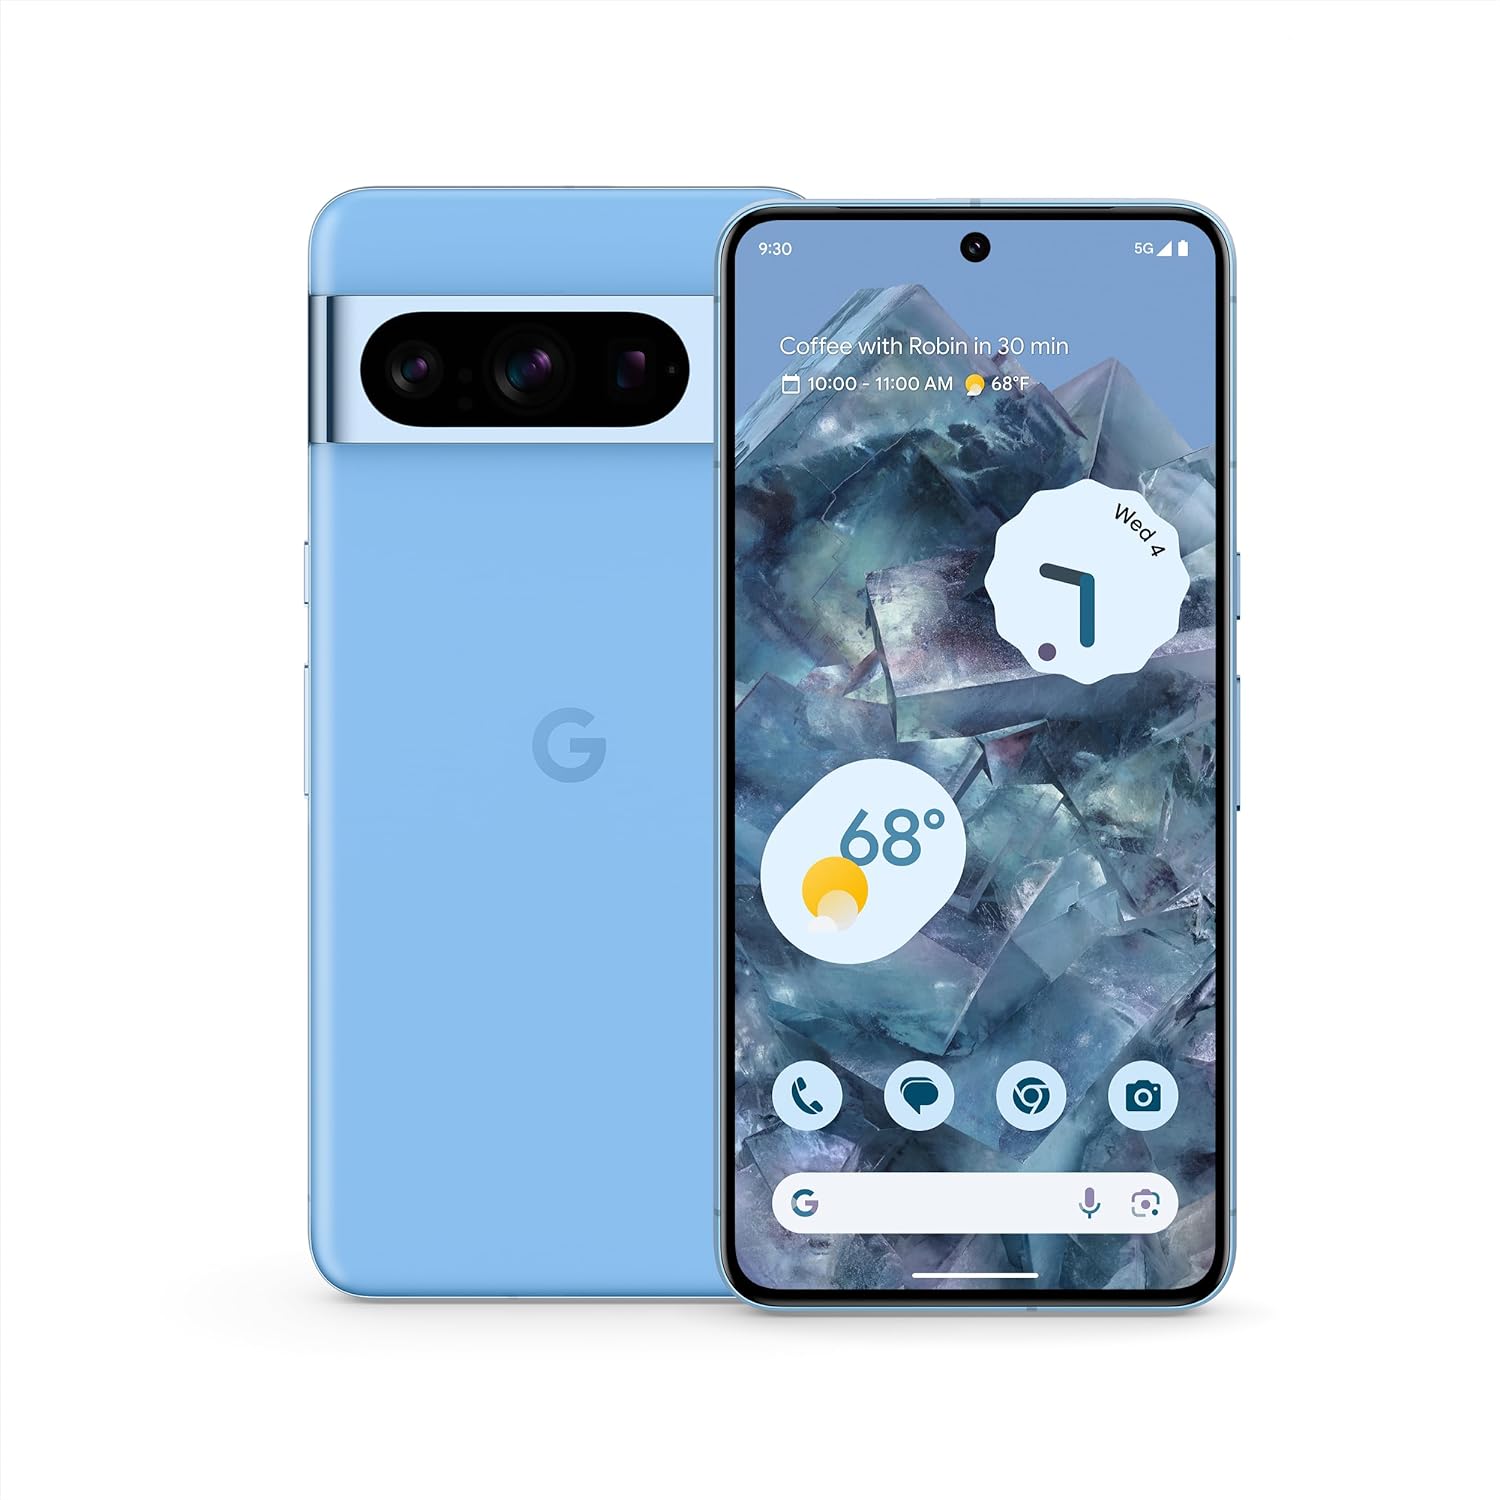 Google Pixel 8 Pro - Unlocked Android Smartphone with Telephoto Lens and Super Actua Display - 24-Hour Battery - Obsidian - 128 GB